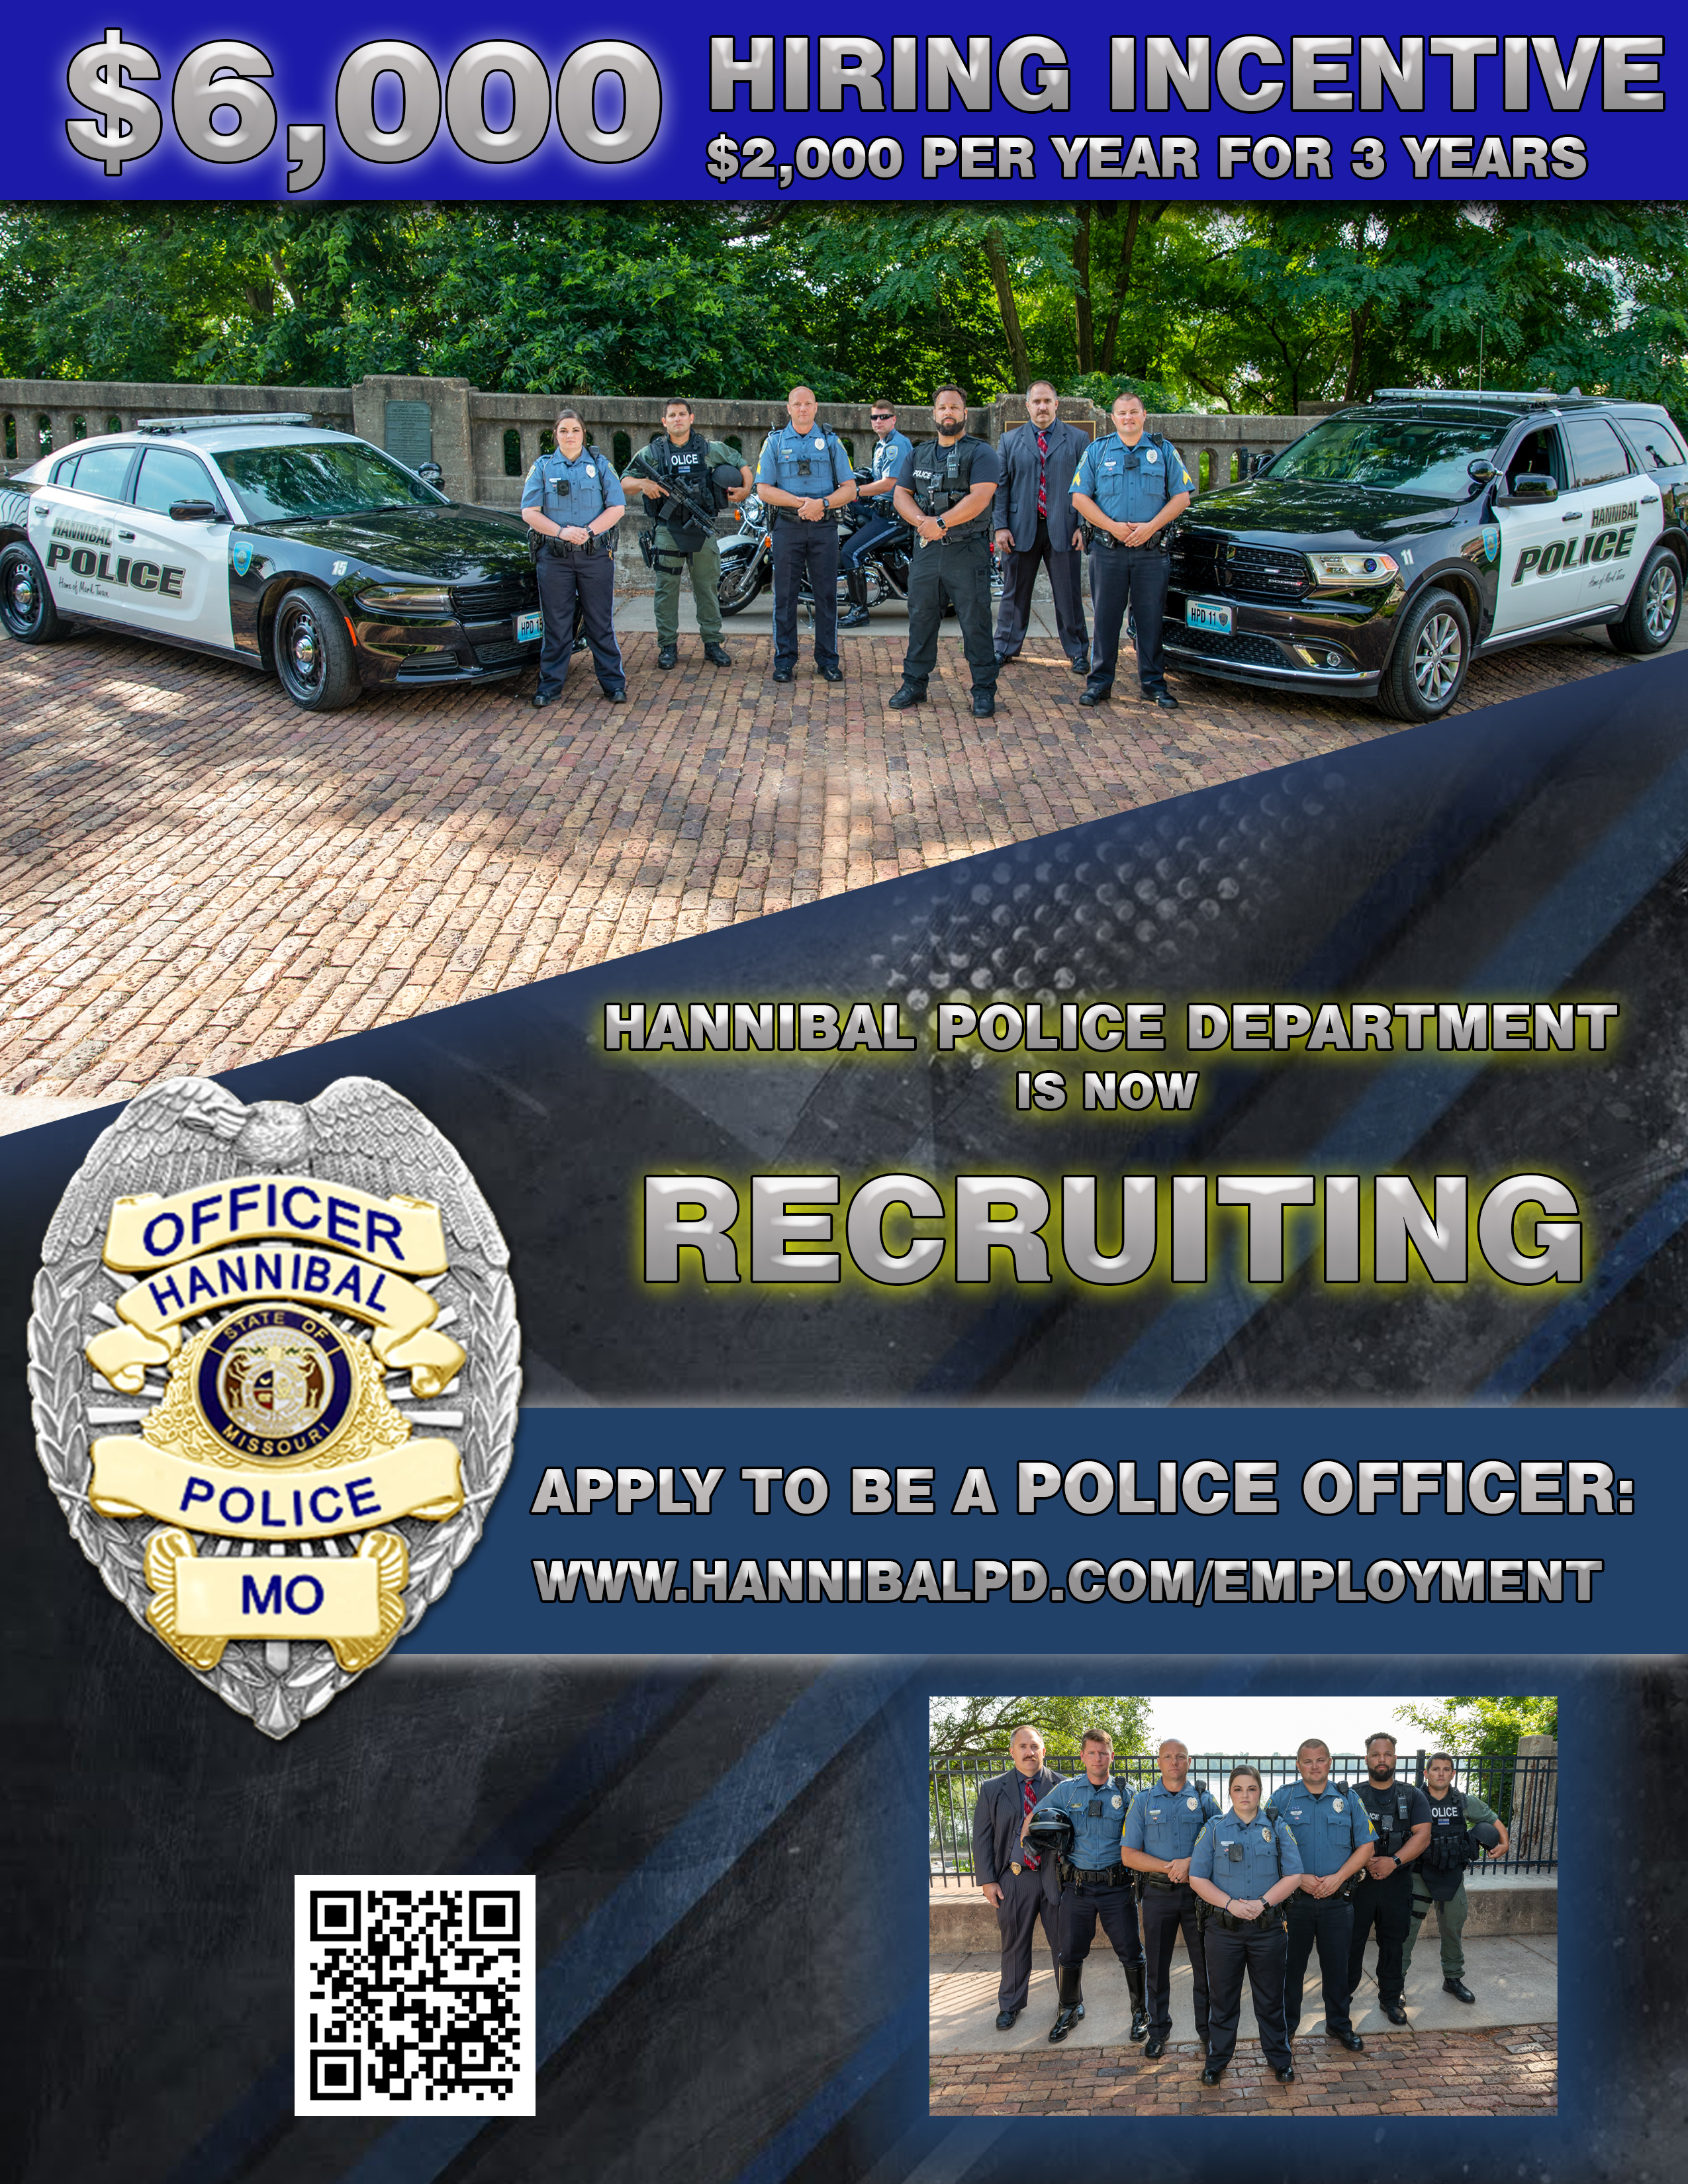 Hannibal Police Officer - Hiring Incentive